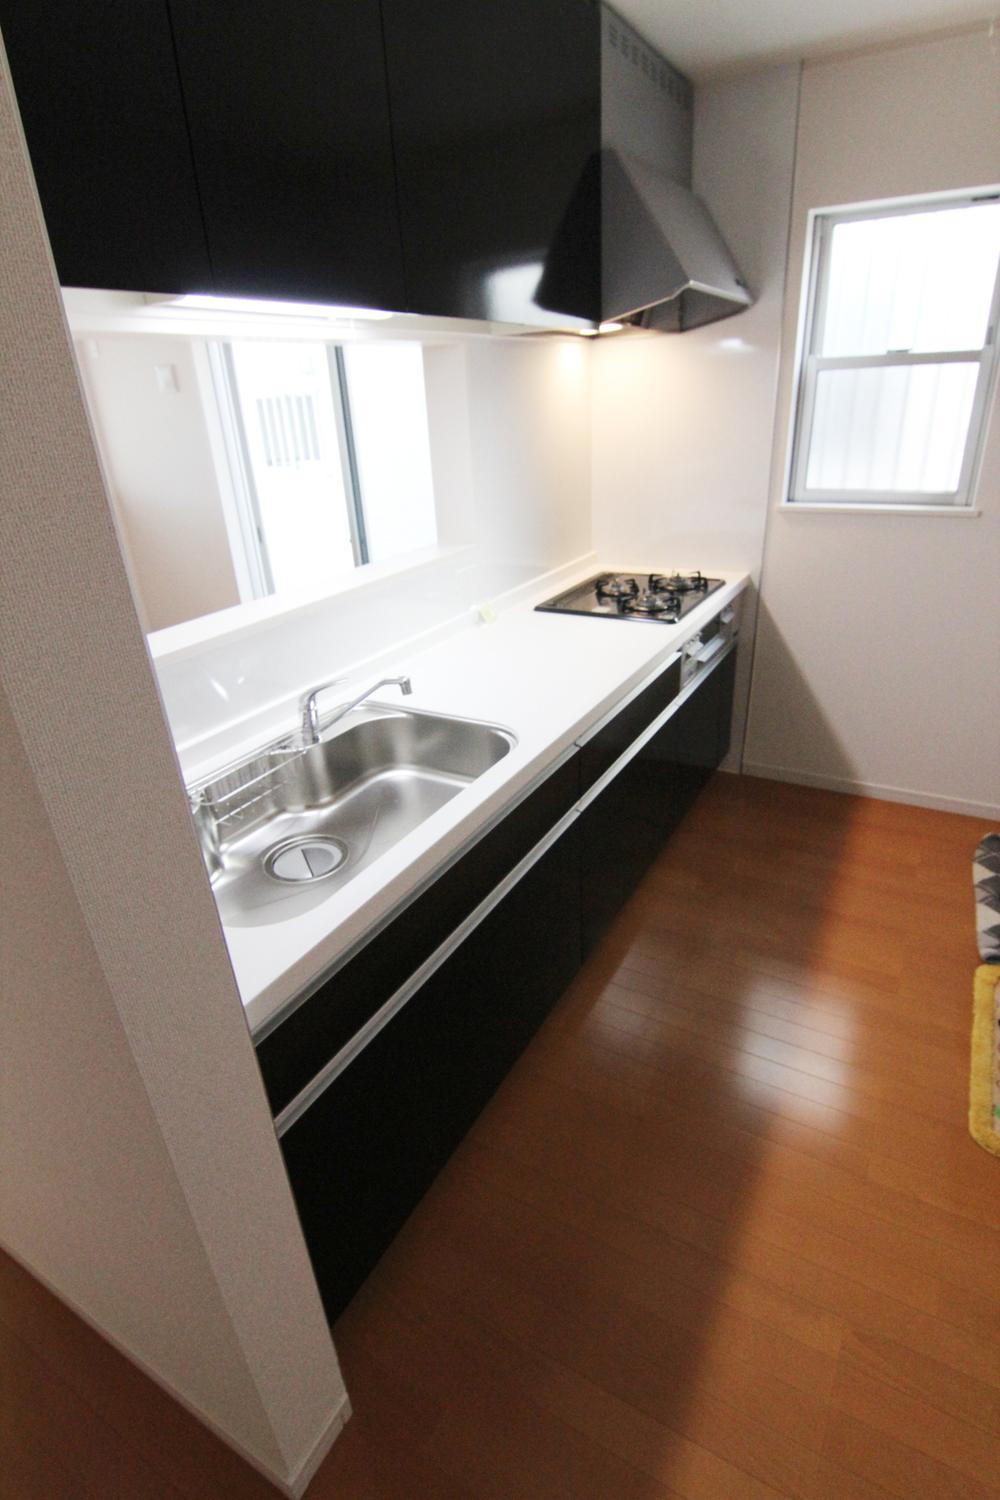 Kitchen. Face-to-face kitchen ○ Quiet sink (population marble plate ・ Water purification function with faucet)